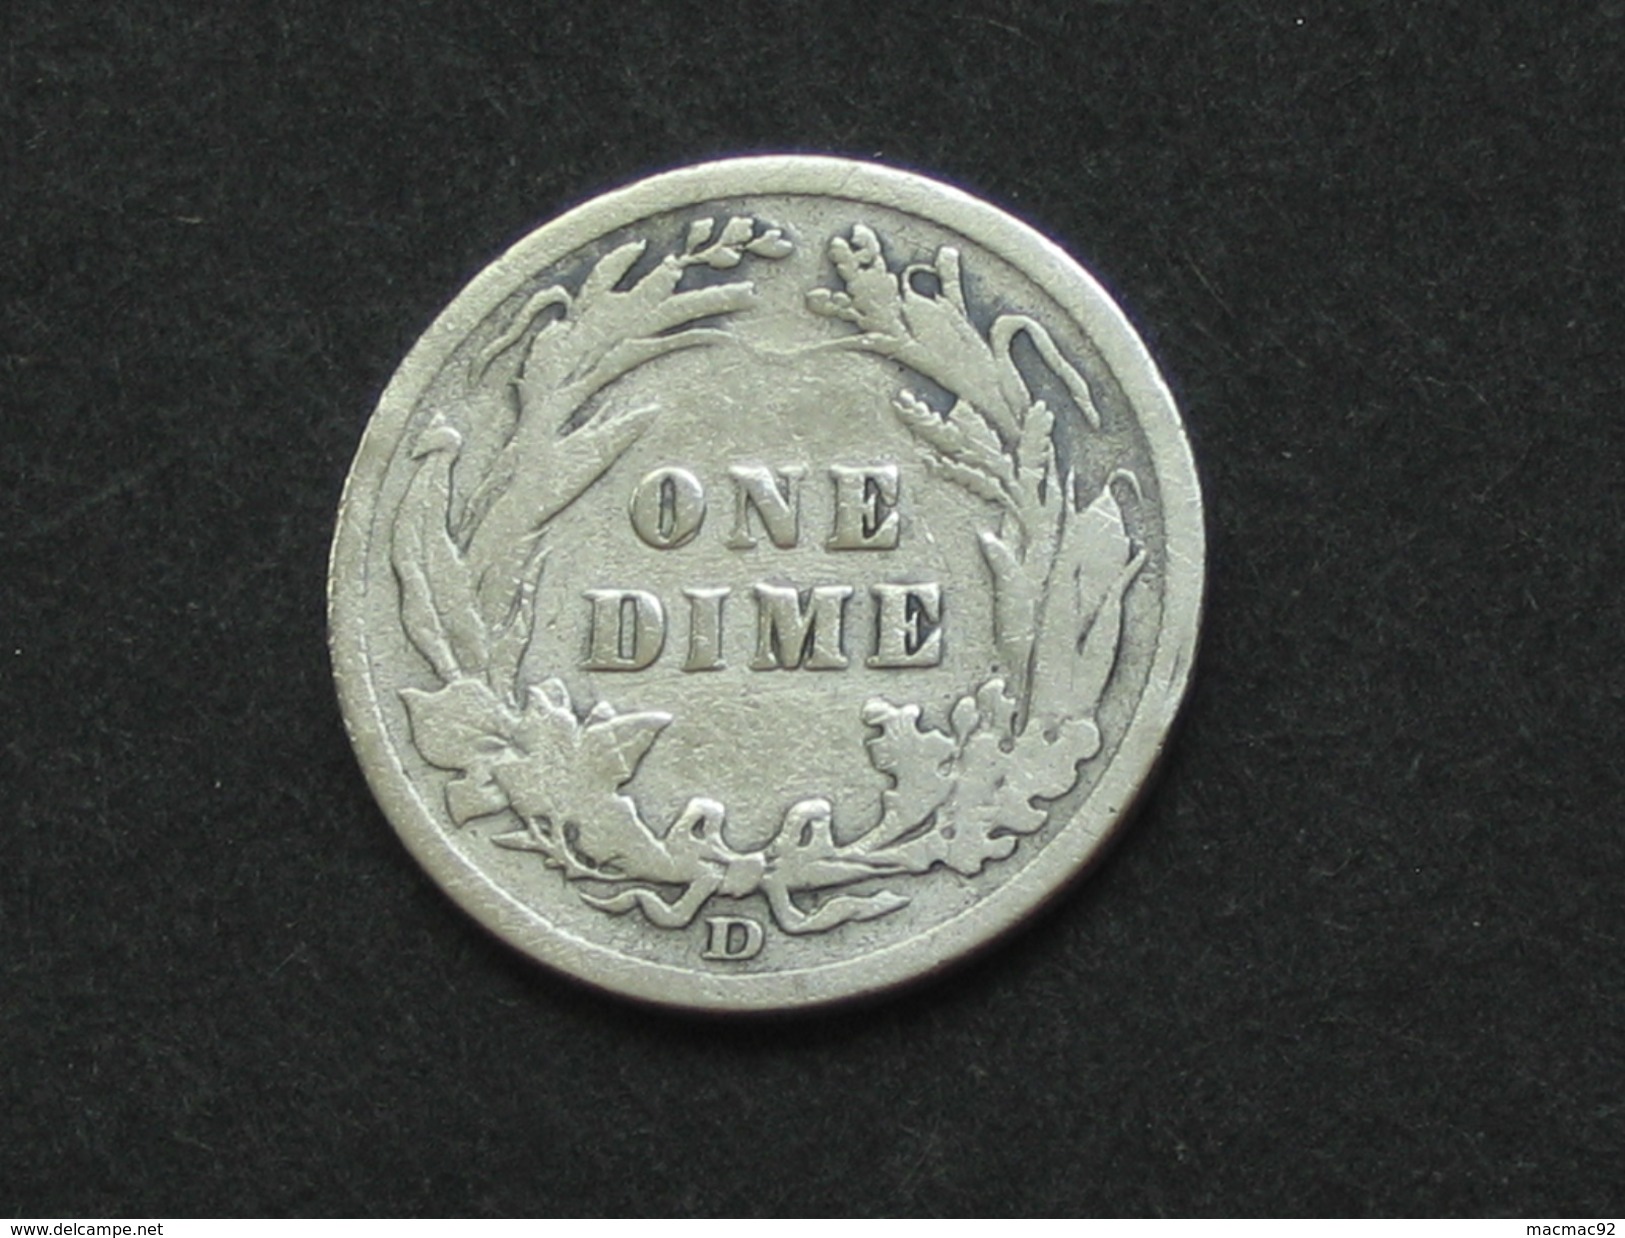 Etats-Unis -USA - One 1 Dime 1909 D - Barber Dime -  United States Of America  **** EN ACHAT IMMEDIAT ****  RARE !!!!! - 1837-1891: Seated Liberty